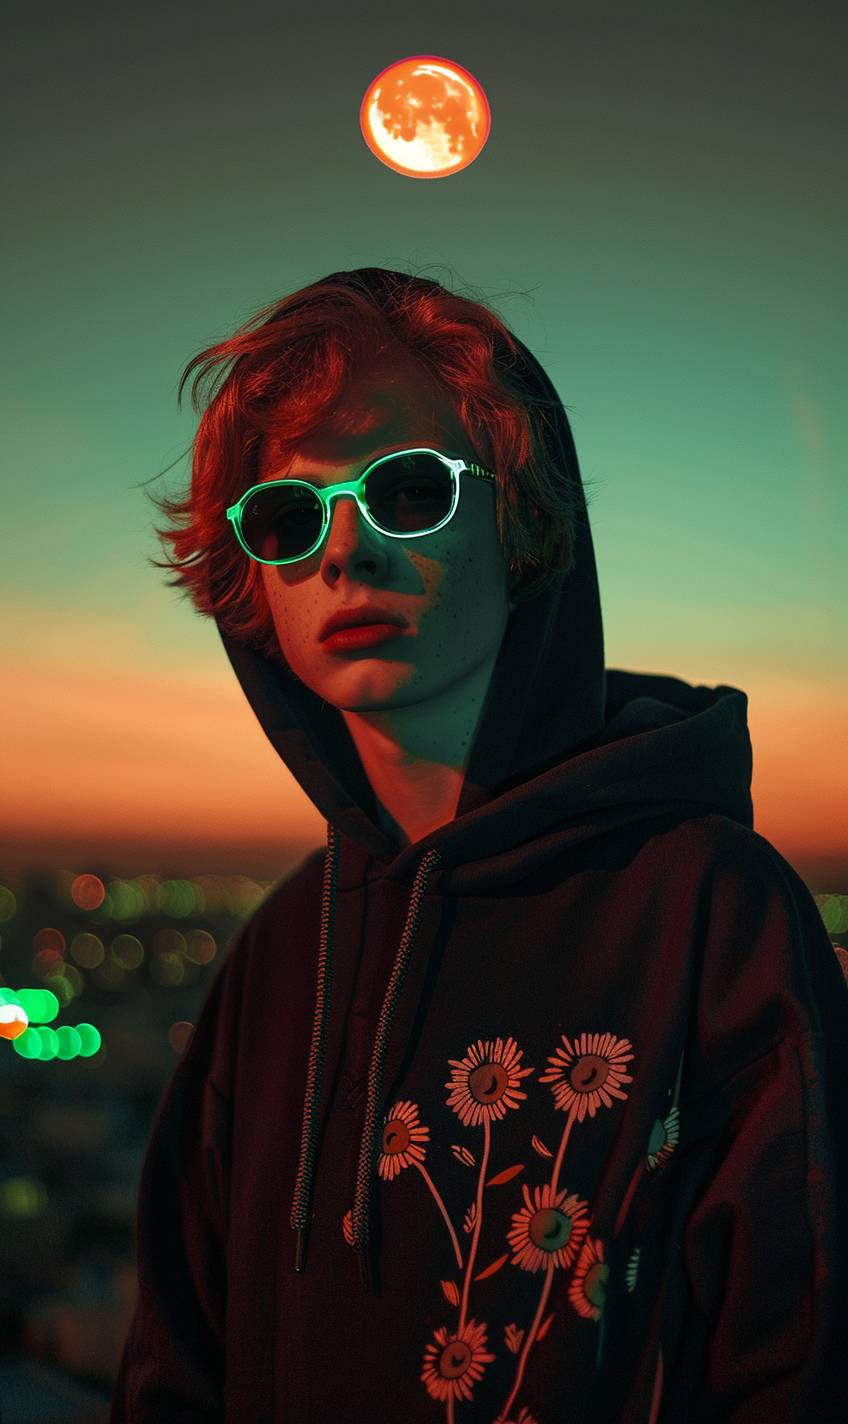 Redhead boy in sunglasses wearing black hoodie with cyan flower pattern. Photograph by Loretta Lux shot with green neon light. Night city in background. Red moon in orange sky.